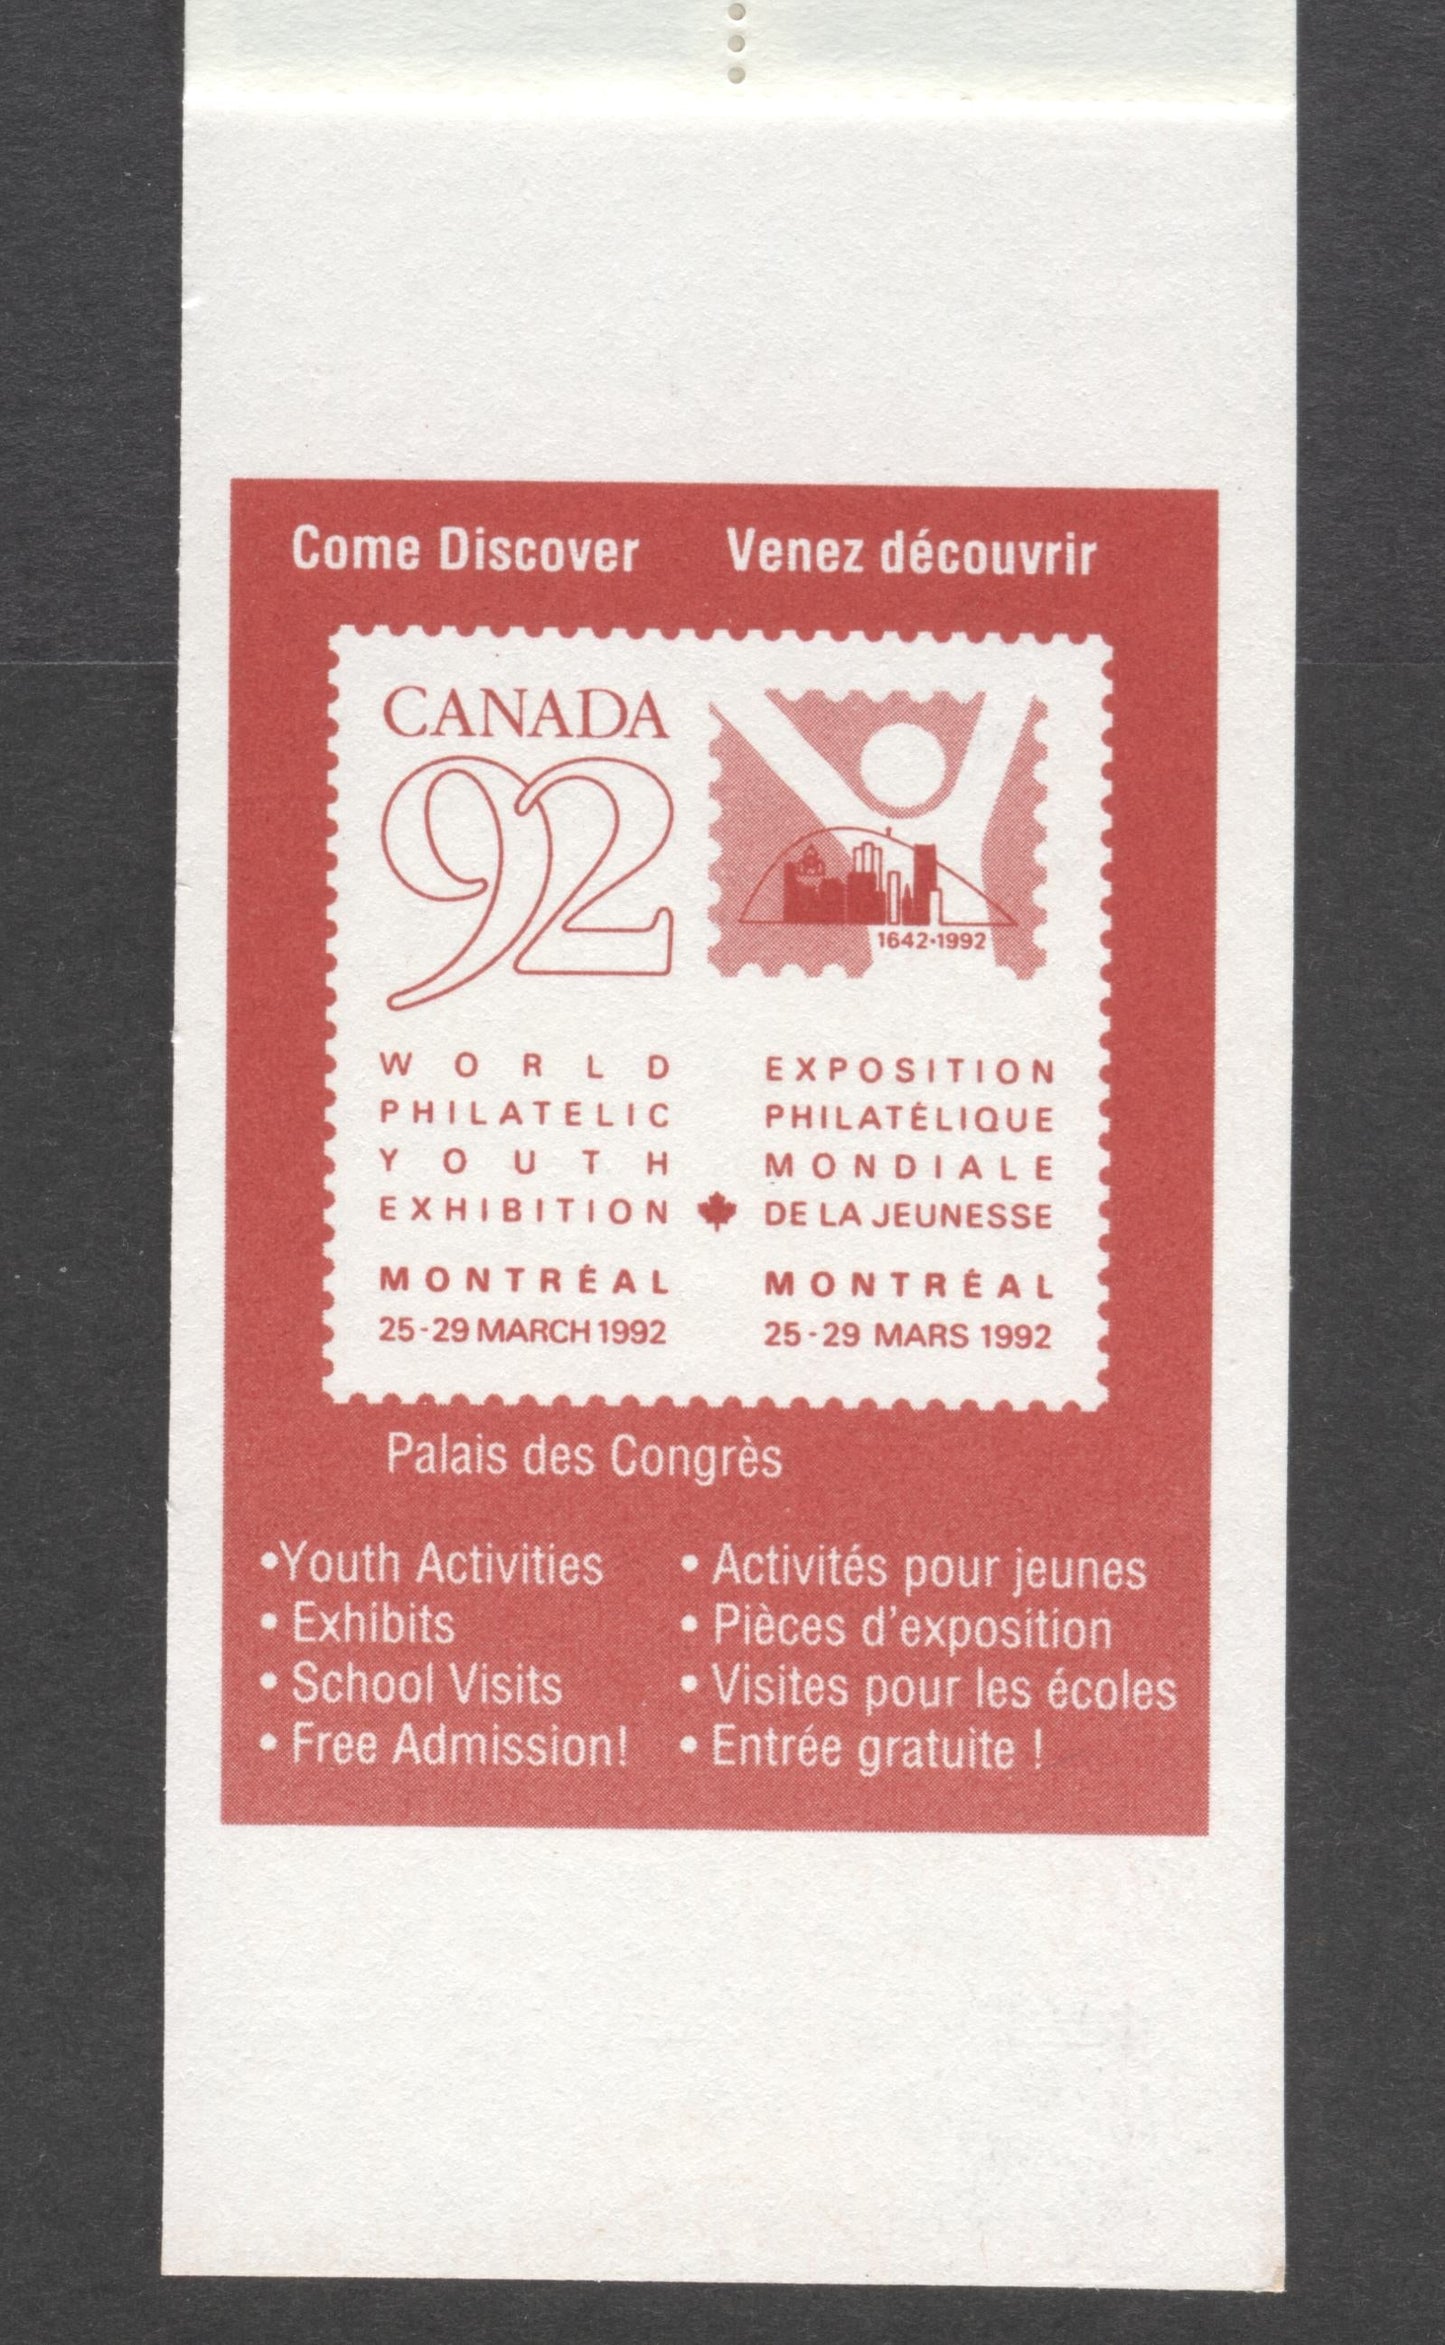 Lot 73 Canada #BK140Ab 1991-1992 Definitive Issue, A 42c Multicolored Booklet, Unsealed, HB Cover Cover Stock, Coated Papers Paper, 2 Stamps + Olympic Logo' & 'Special Letters' Covers, AP Printing, 'Canada '92' on Inside Front, Perforated Selvedge